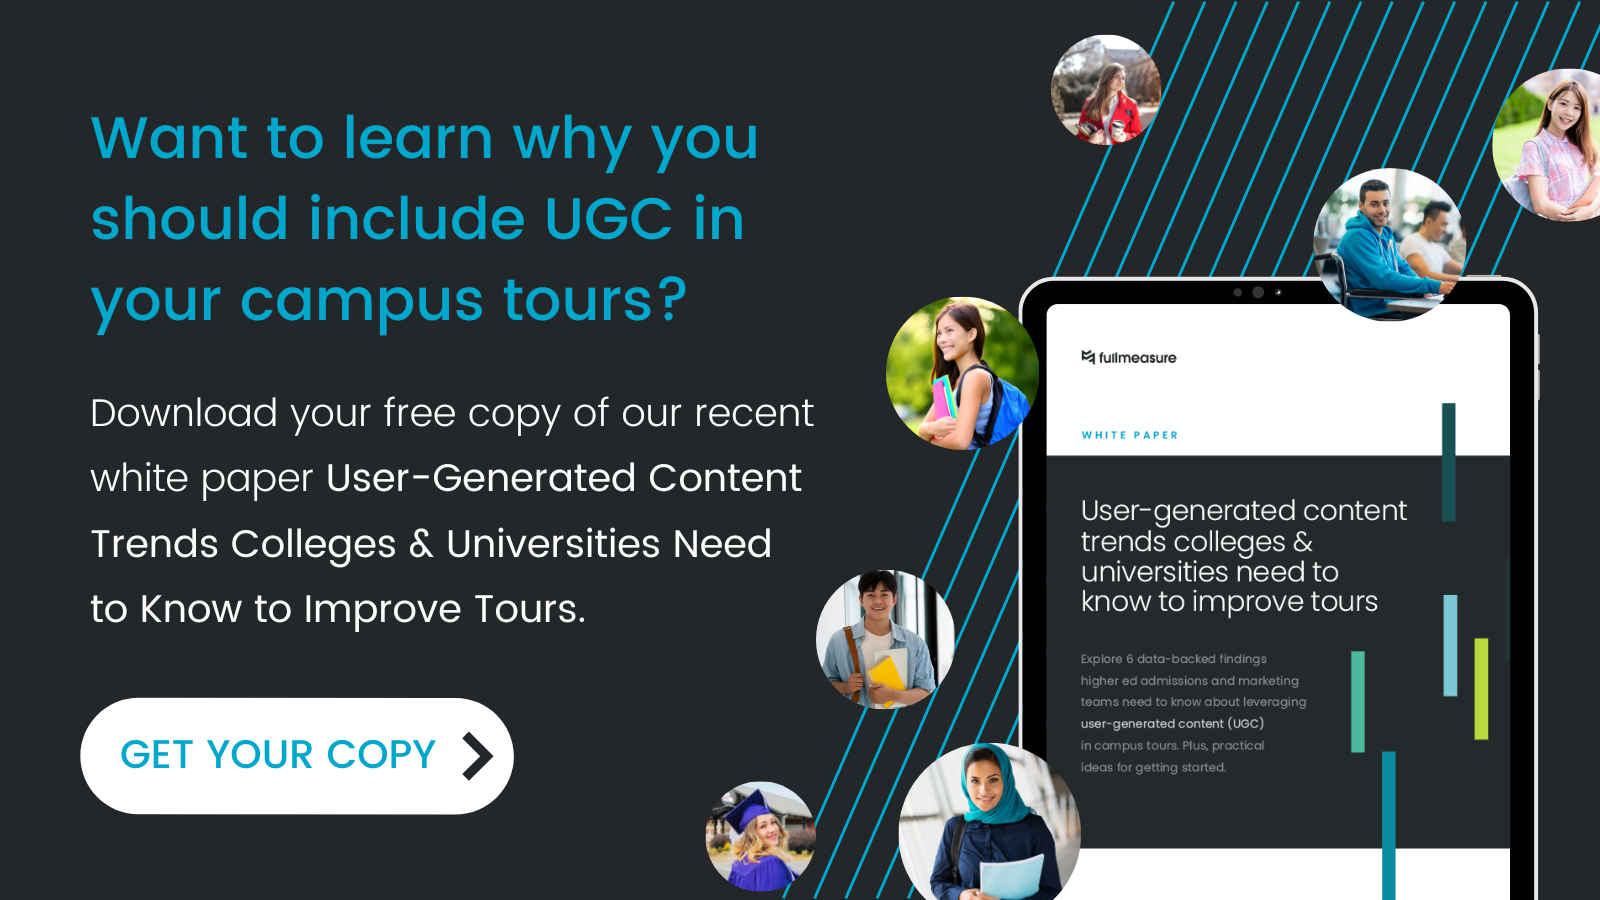 UGC trends to know to improve tours white paper ad